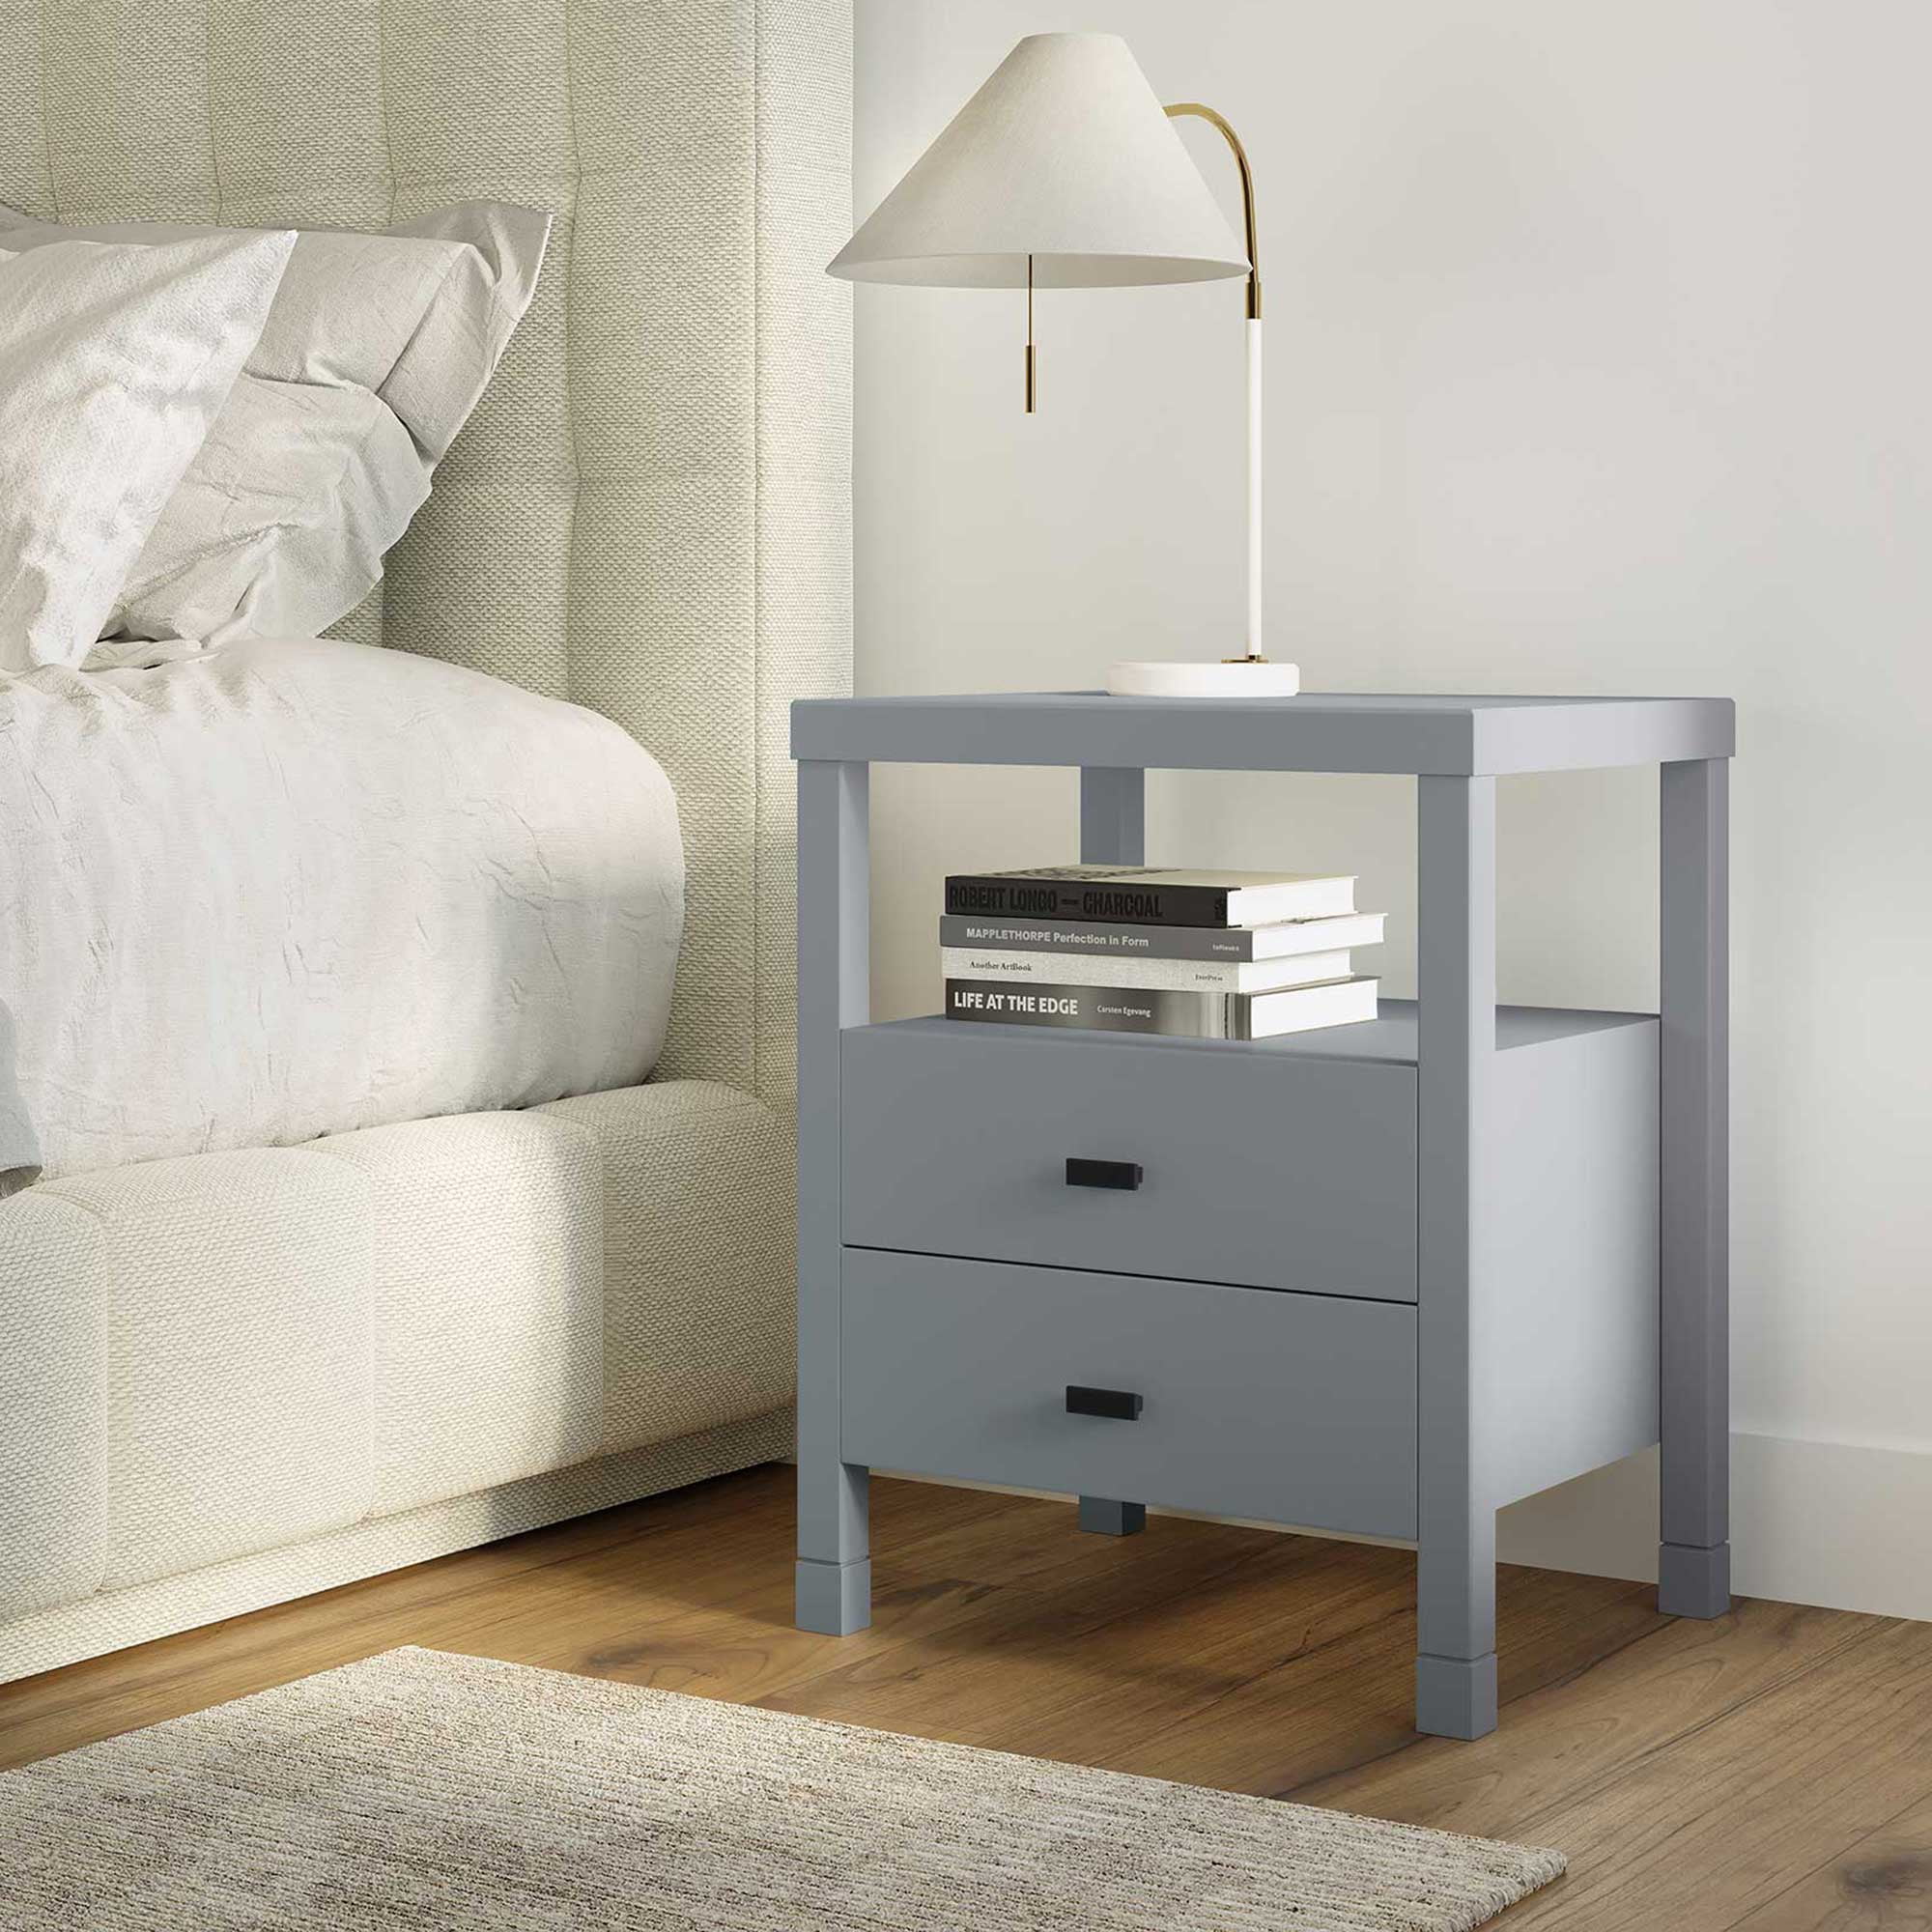 East West Furniture Vl-0c-et Small Night Stand with 2 Wooden Drawers, Stable and Sturdy Constructed - Wire Brushed Butter Cream Finish